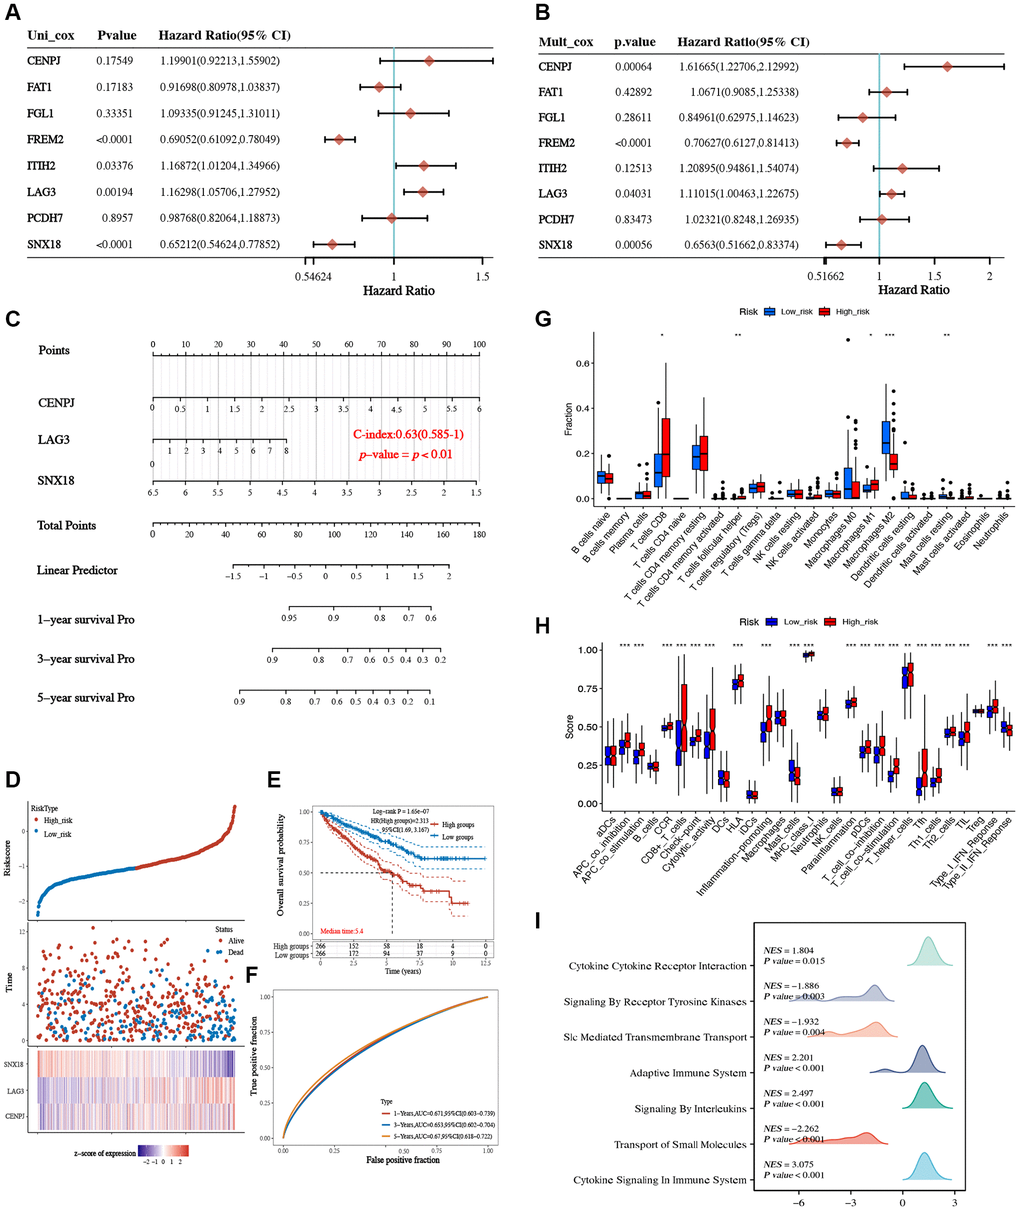 Construction and validation of a prognostic model based on LAG3-related genes. Univariate (A) and multivariate (B) Cox regression analysis of LAG3-related genes. (C) Nomogram to predict the 1-year, 3-year, and 5-year OS of KIRC. (D) Riskscore scatterplot, survival status scatterplot, and model gene expression heatmap. (E) Survival curve of high/low-risk score. (F) ROC curves of the prognostic model at 1-year, 3-years, and 5-years. (G) The box plot depicting the immune cell infiltration levels in the high- and low-risk groups. (H) Box plot of immune pathway scores in the high- and low-risk groups. (I) Mountain plots of GSEA for the high- and low-risk groups. (*P **P ***P 